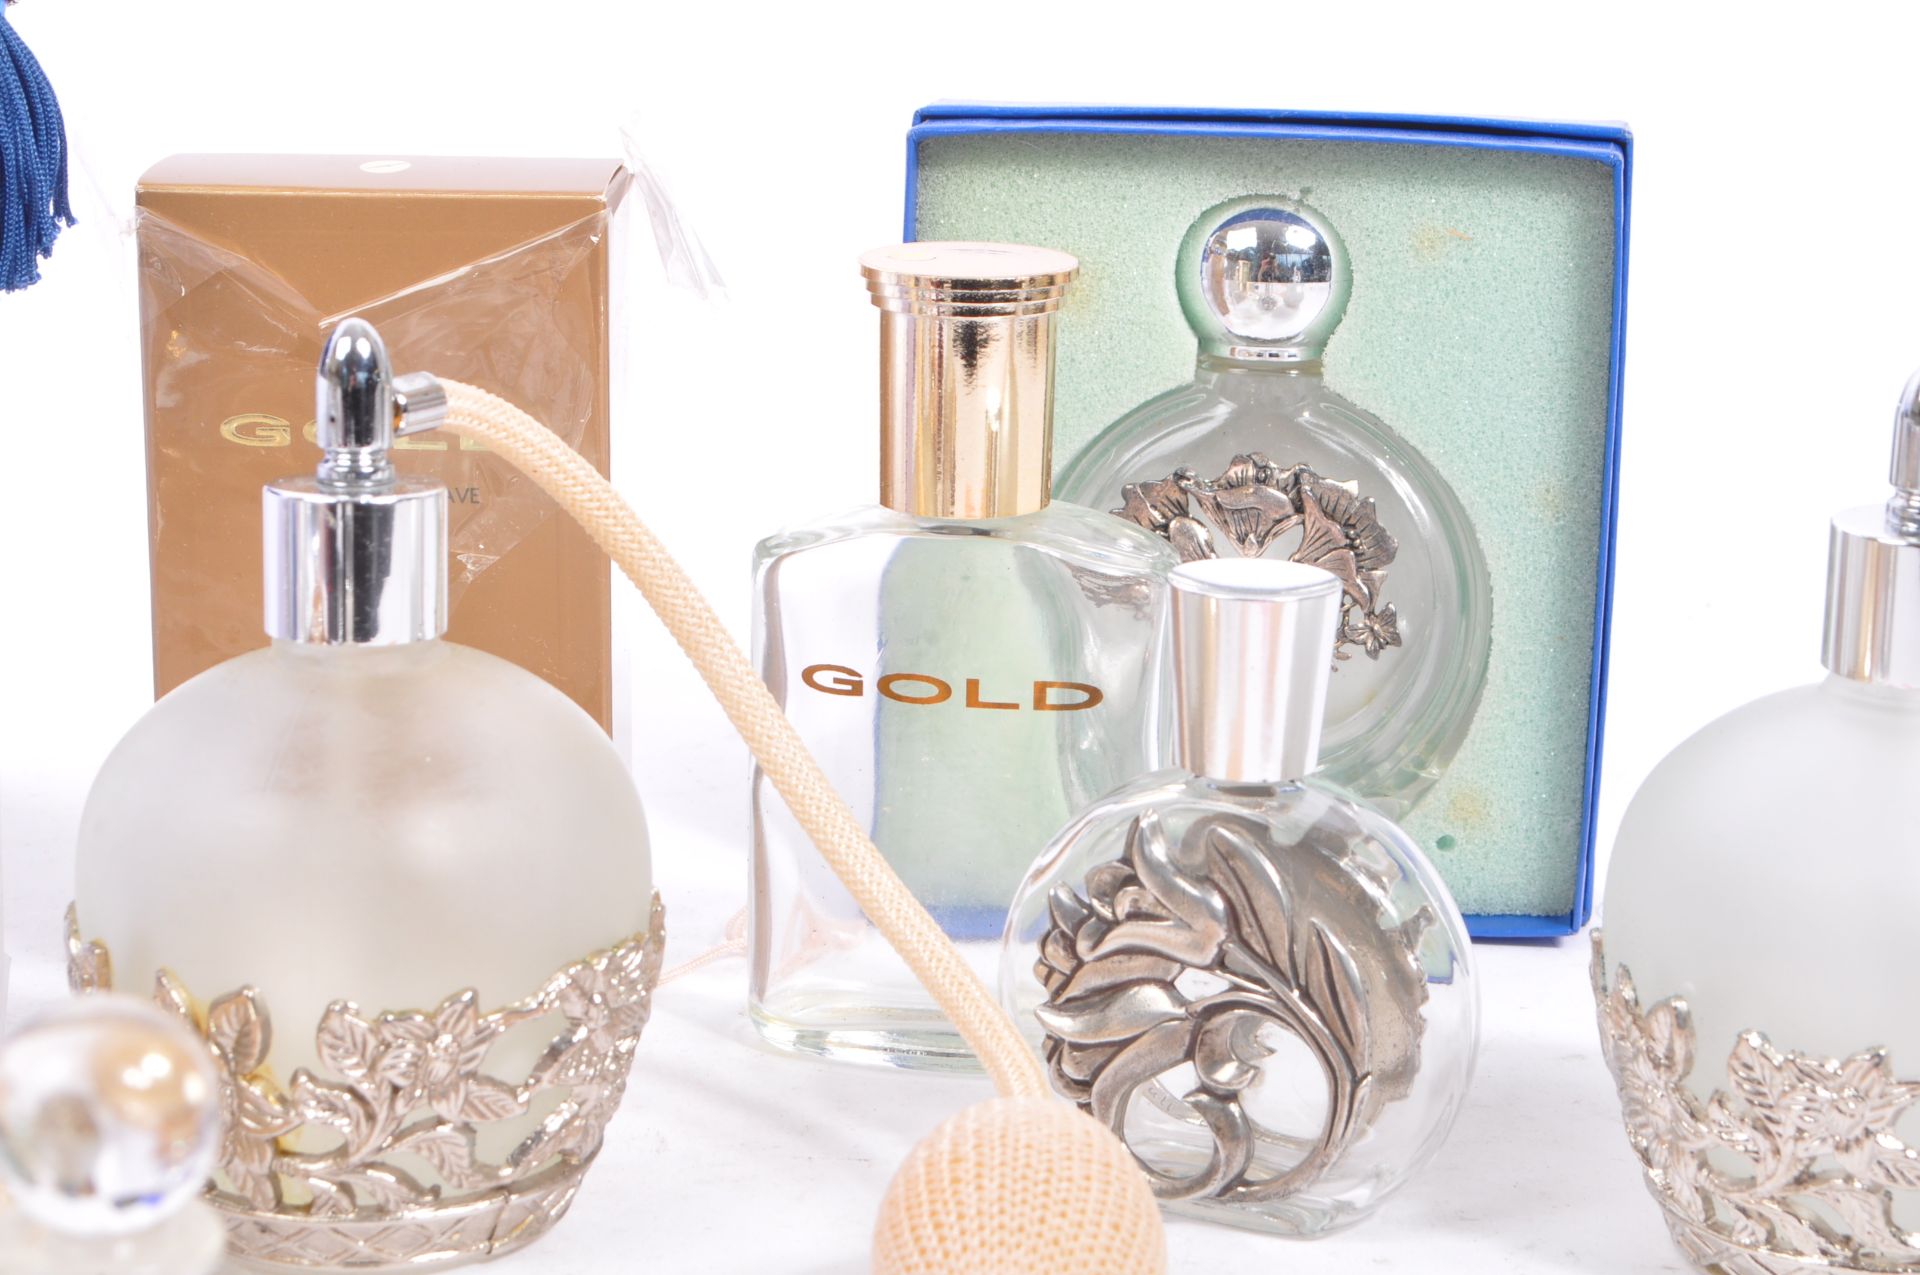 COLLECTION OF PERFUME FRAGRANCE BOTTLES - Image 5 of 10